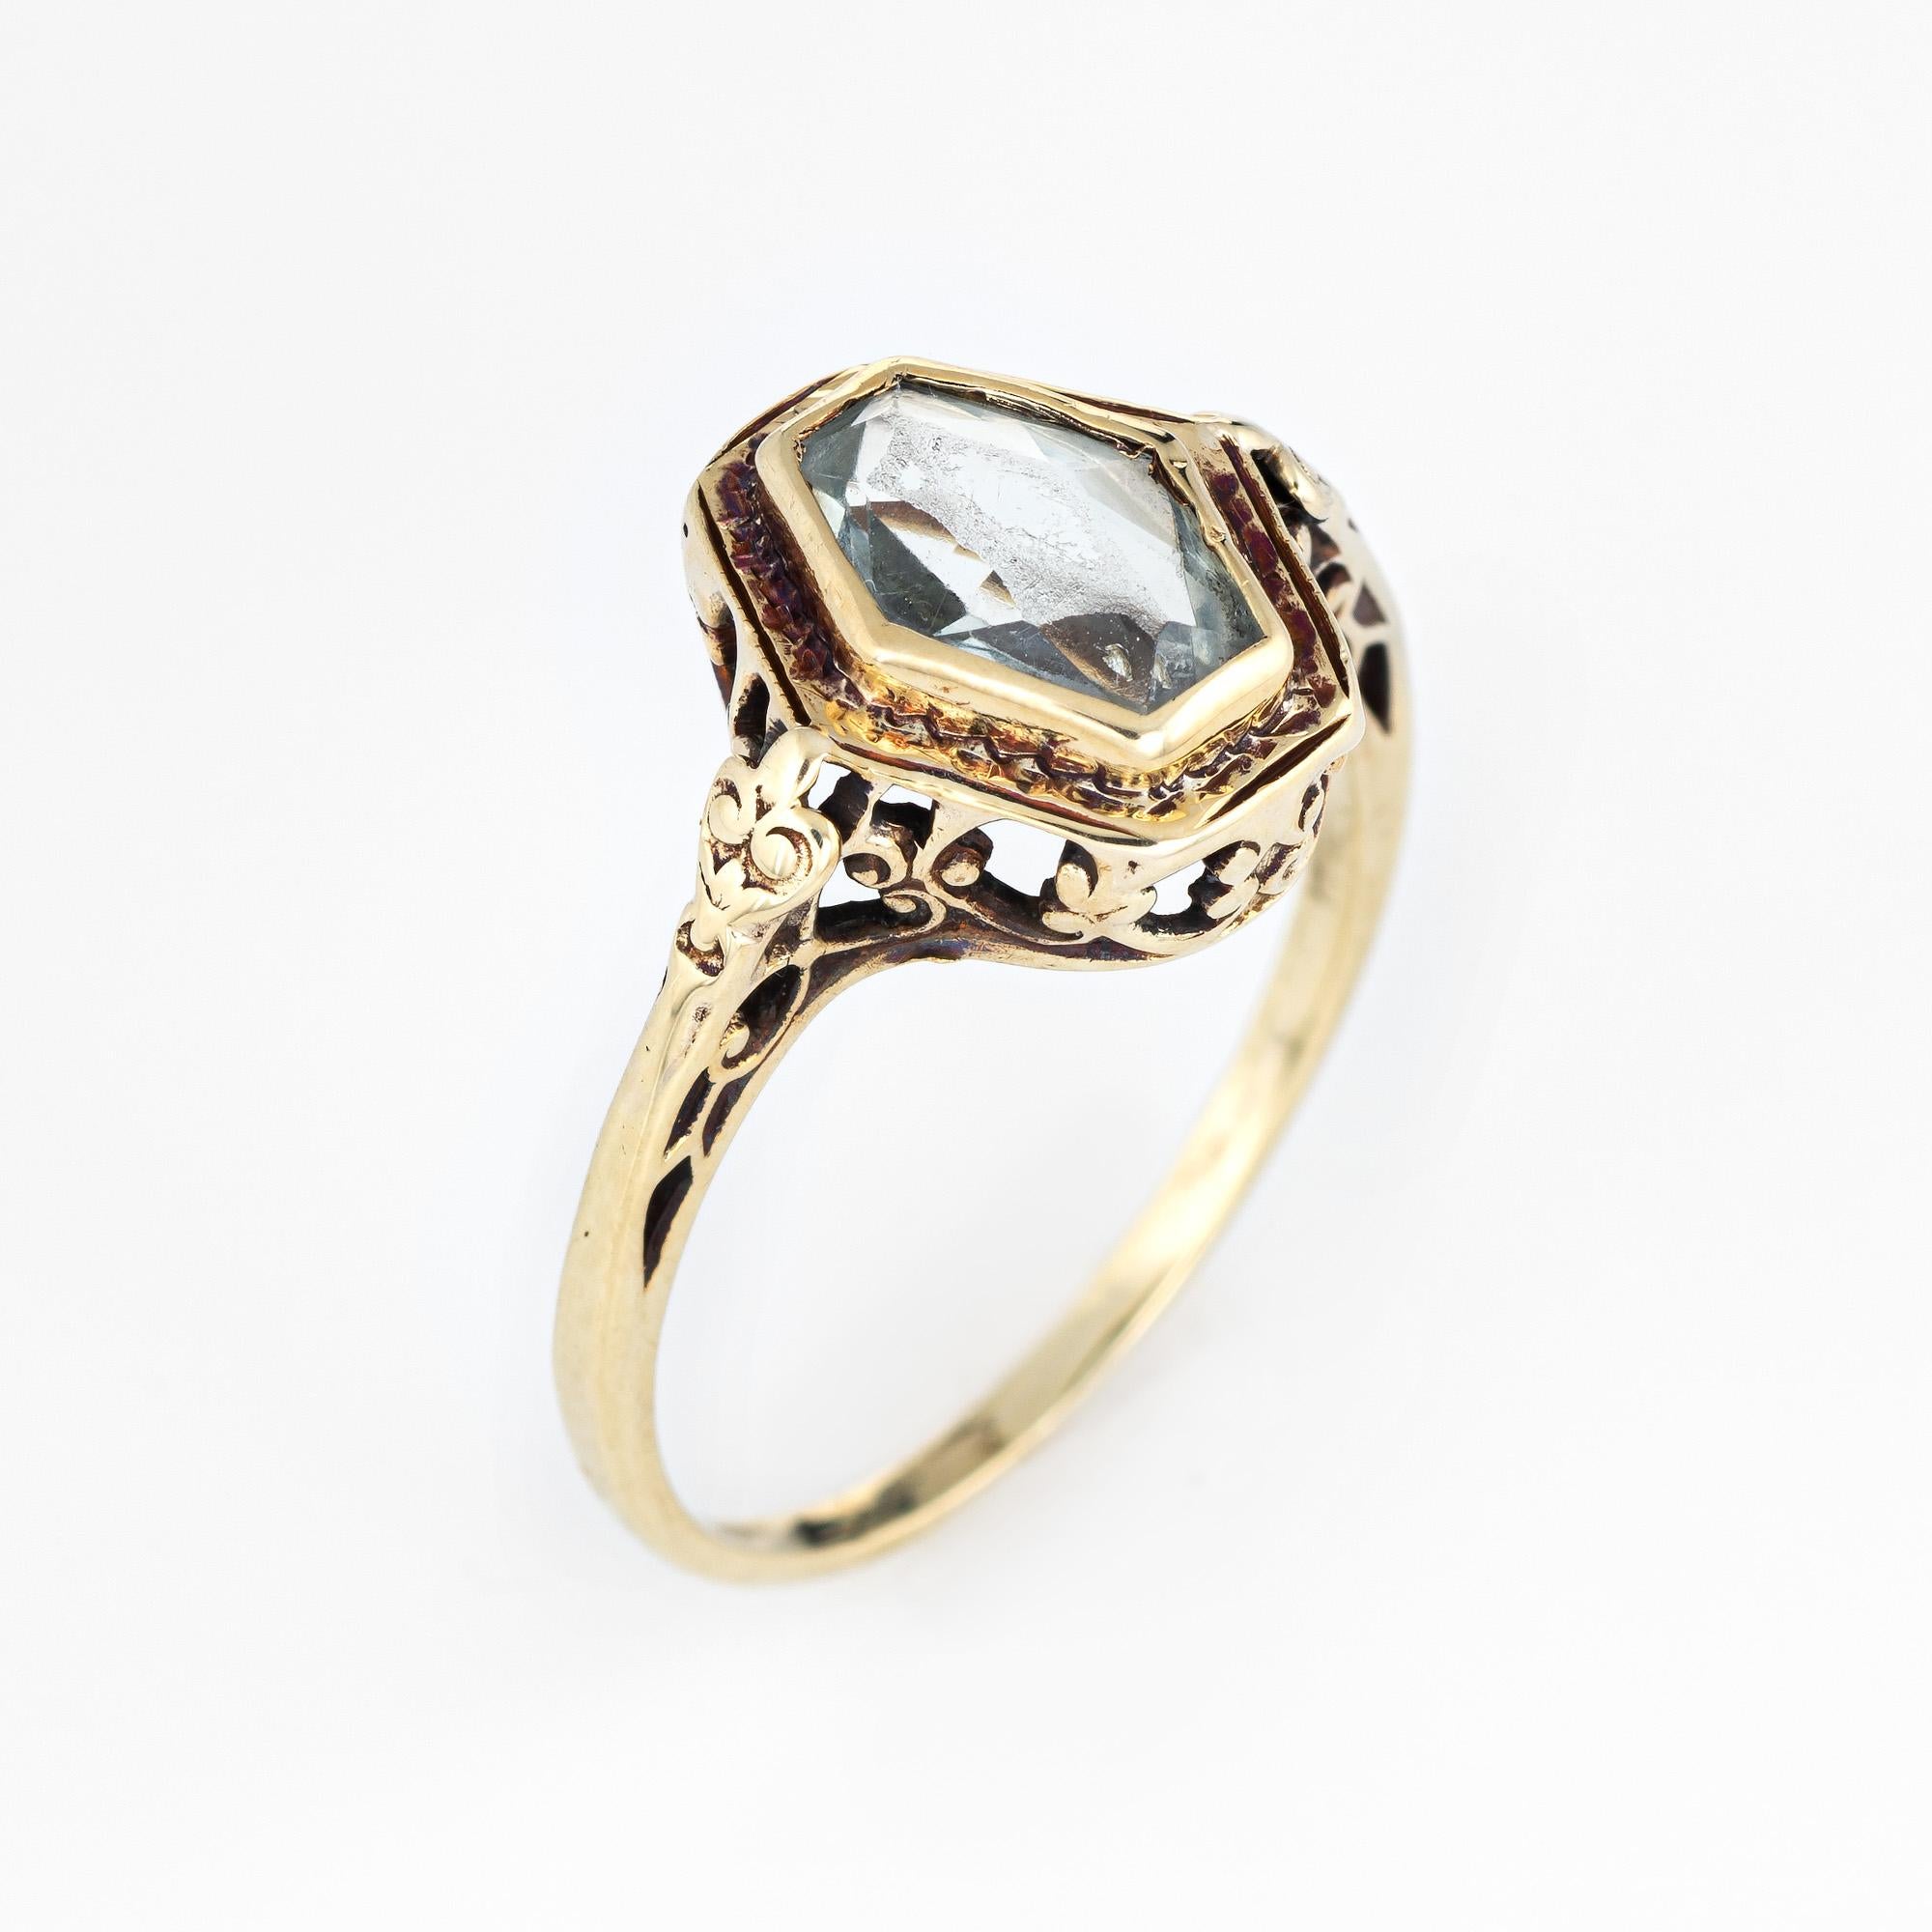 Stylish vintage Art Deco era ring (circa 1920s to 1930s) crafted in 14 karat yellow gold. 

Fancy cut aquamarine measures 9mm x 6mm (estimated at 1 carat). The aquamarine shows light surface abrasions from wear (visible under a 10x loupe). 

The